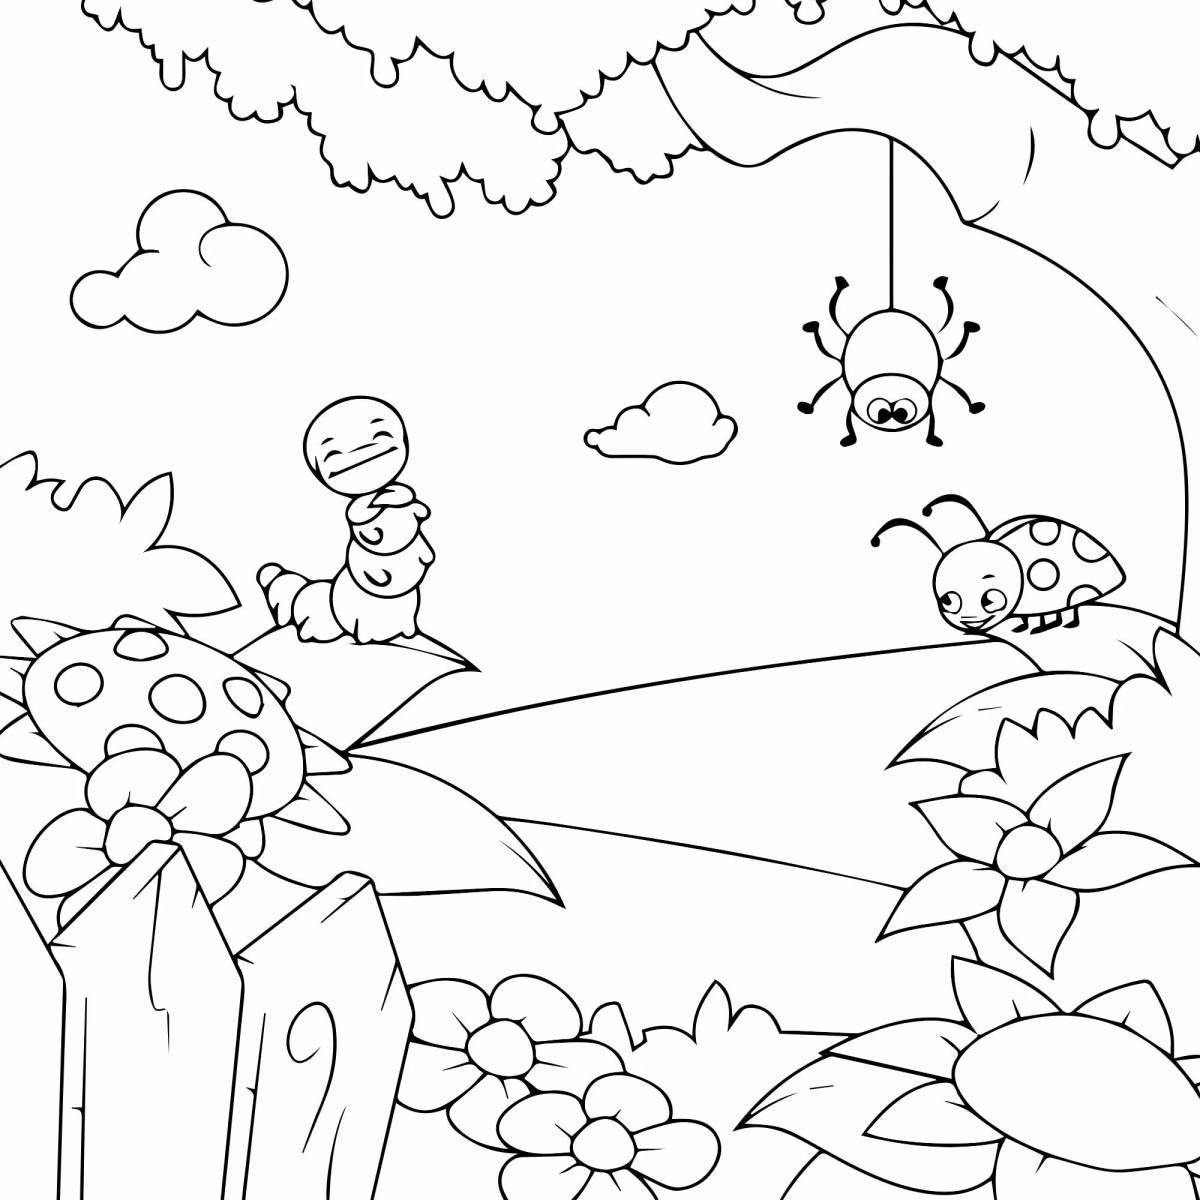 Coloring page merry meadow